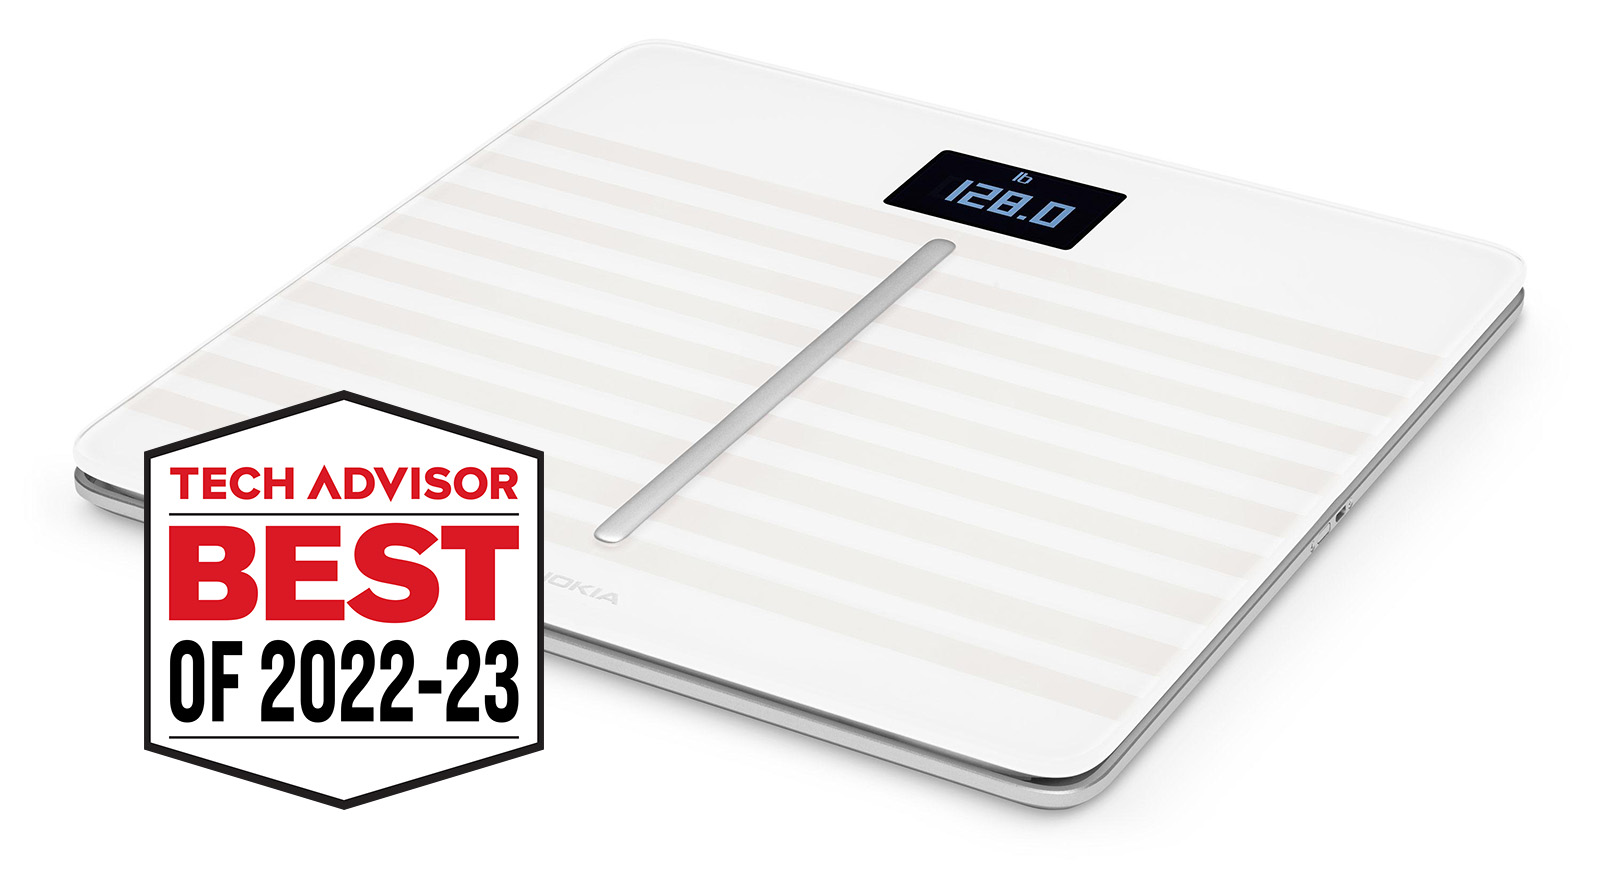 BEST SMART SCALES: Withings Body Cardio